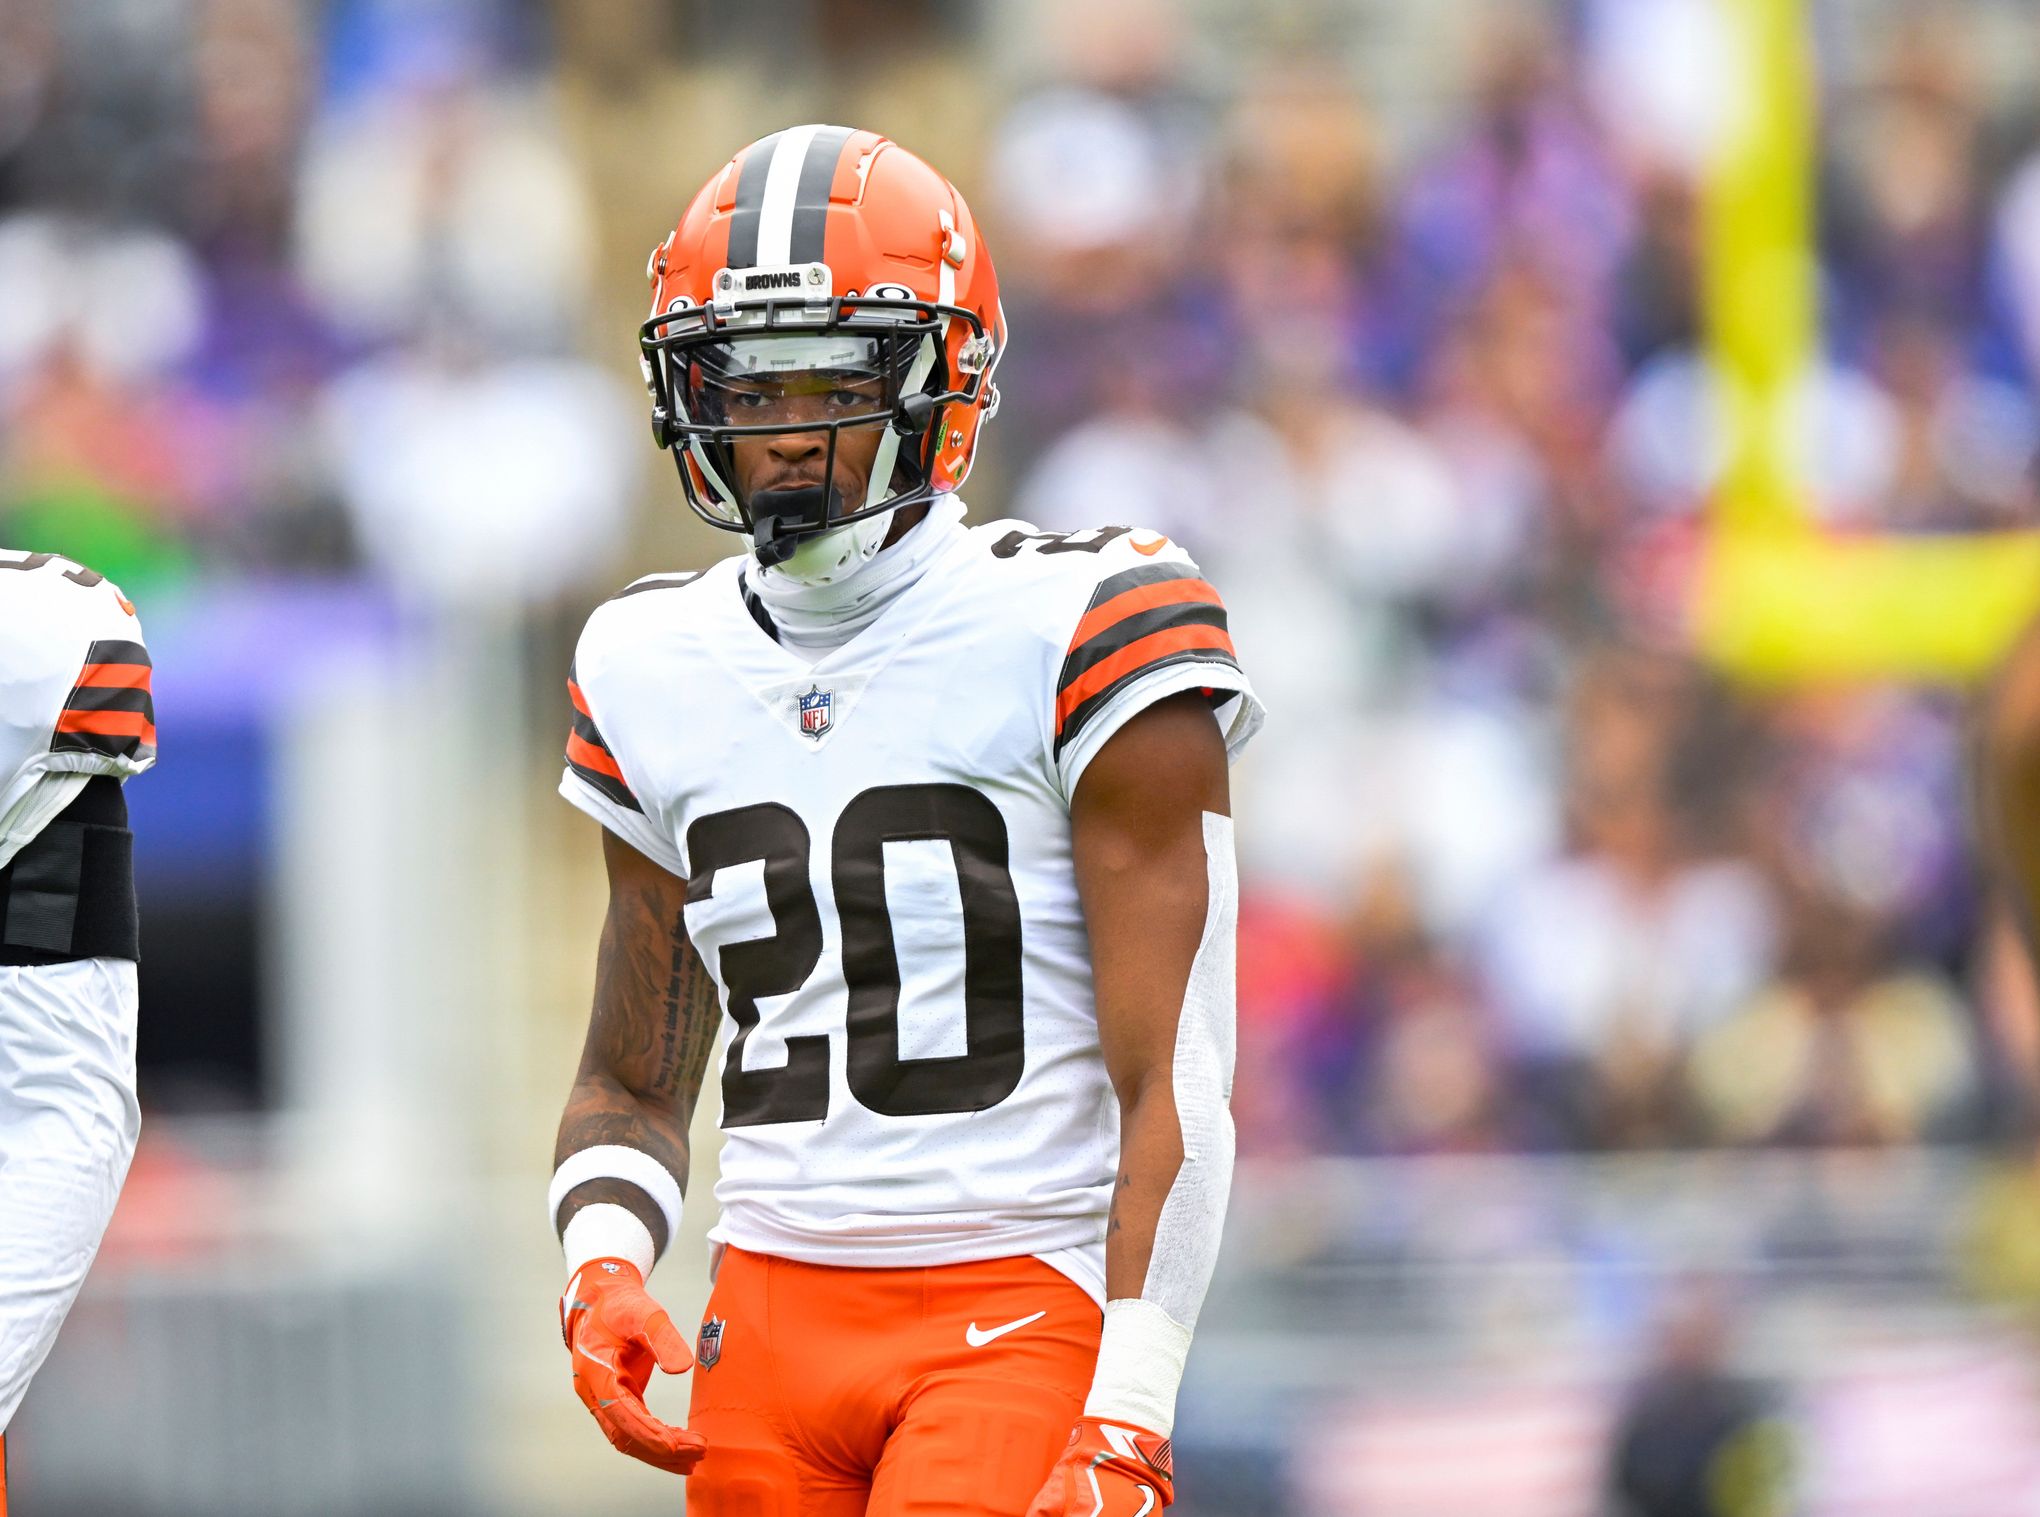 Browns CB Newsome II out against Buccaneers with concussion